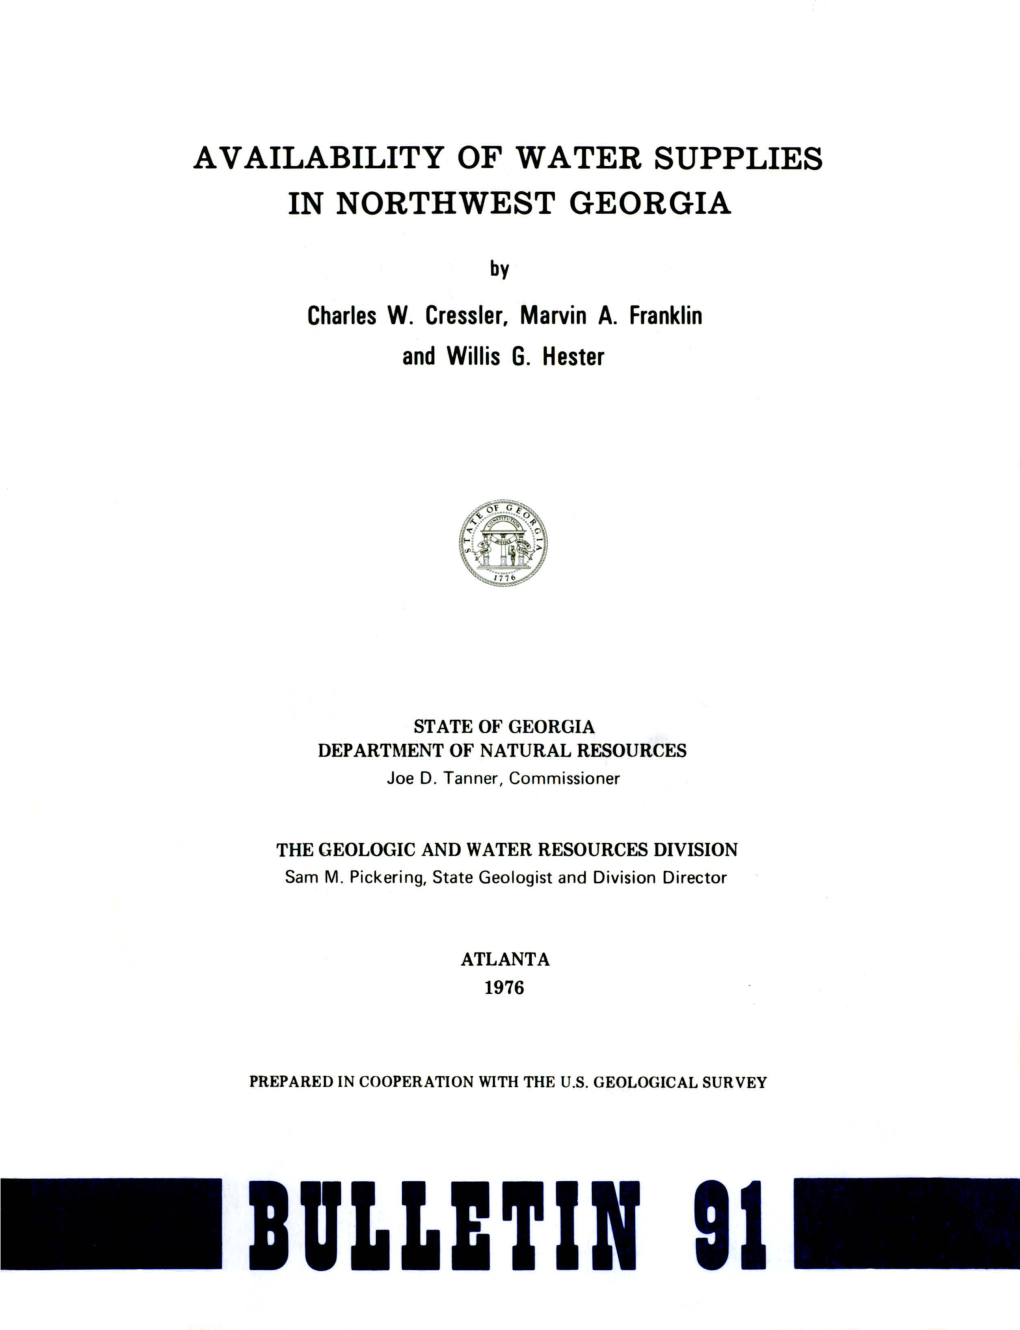 Availability of Water Supplies in Northwest Georgia